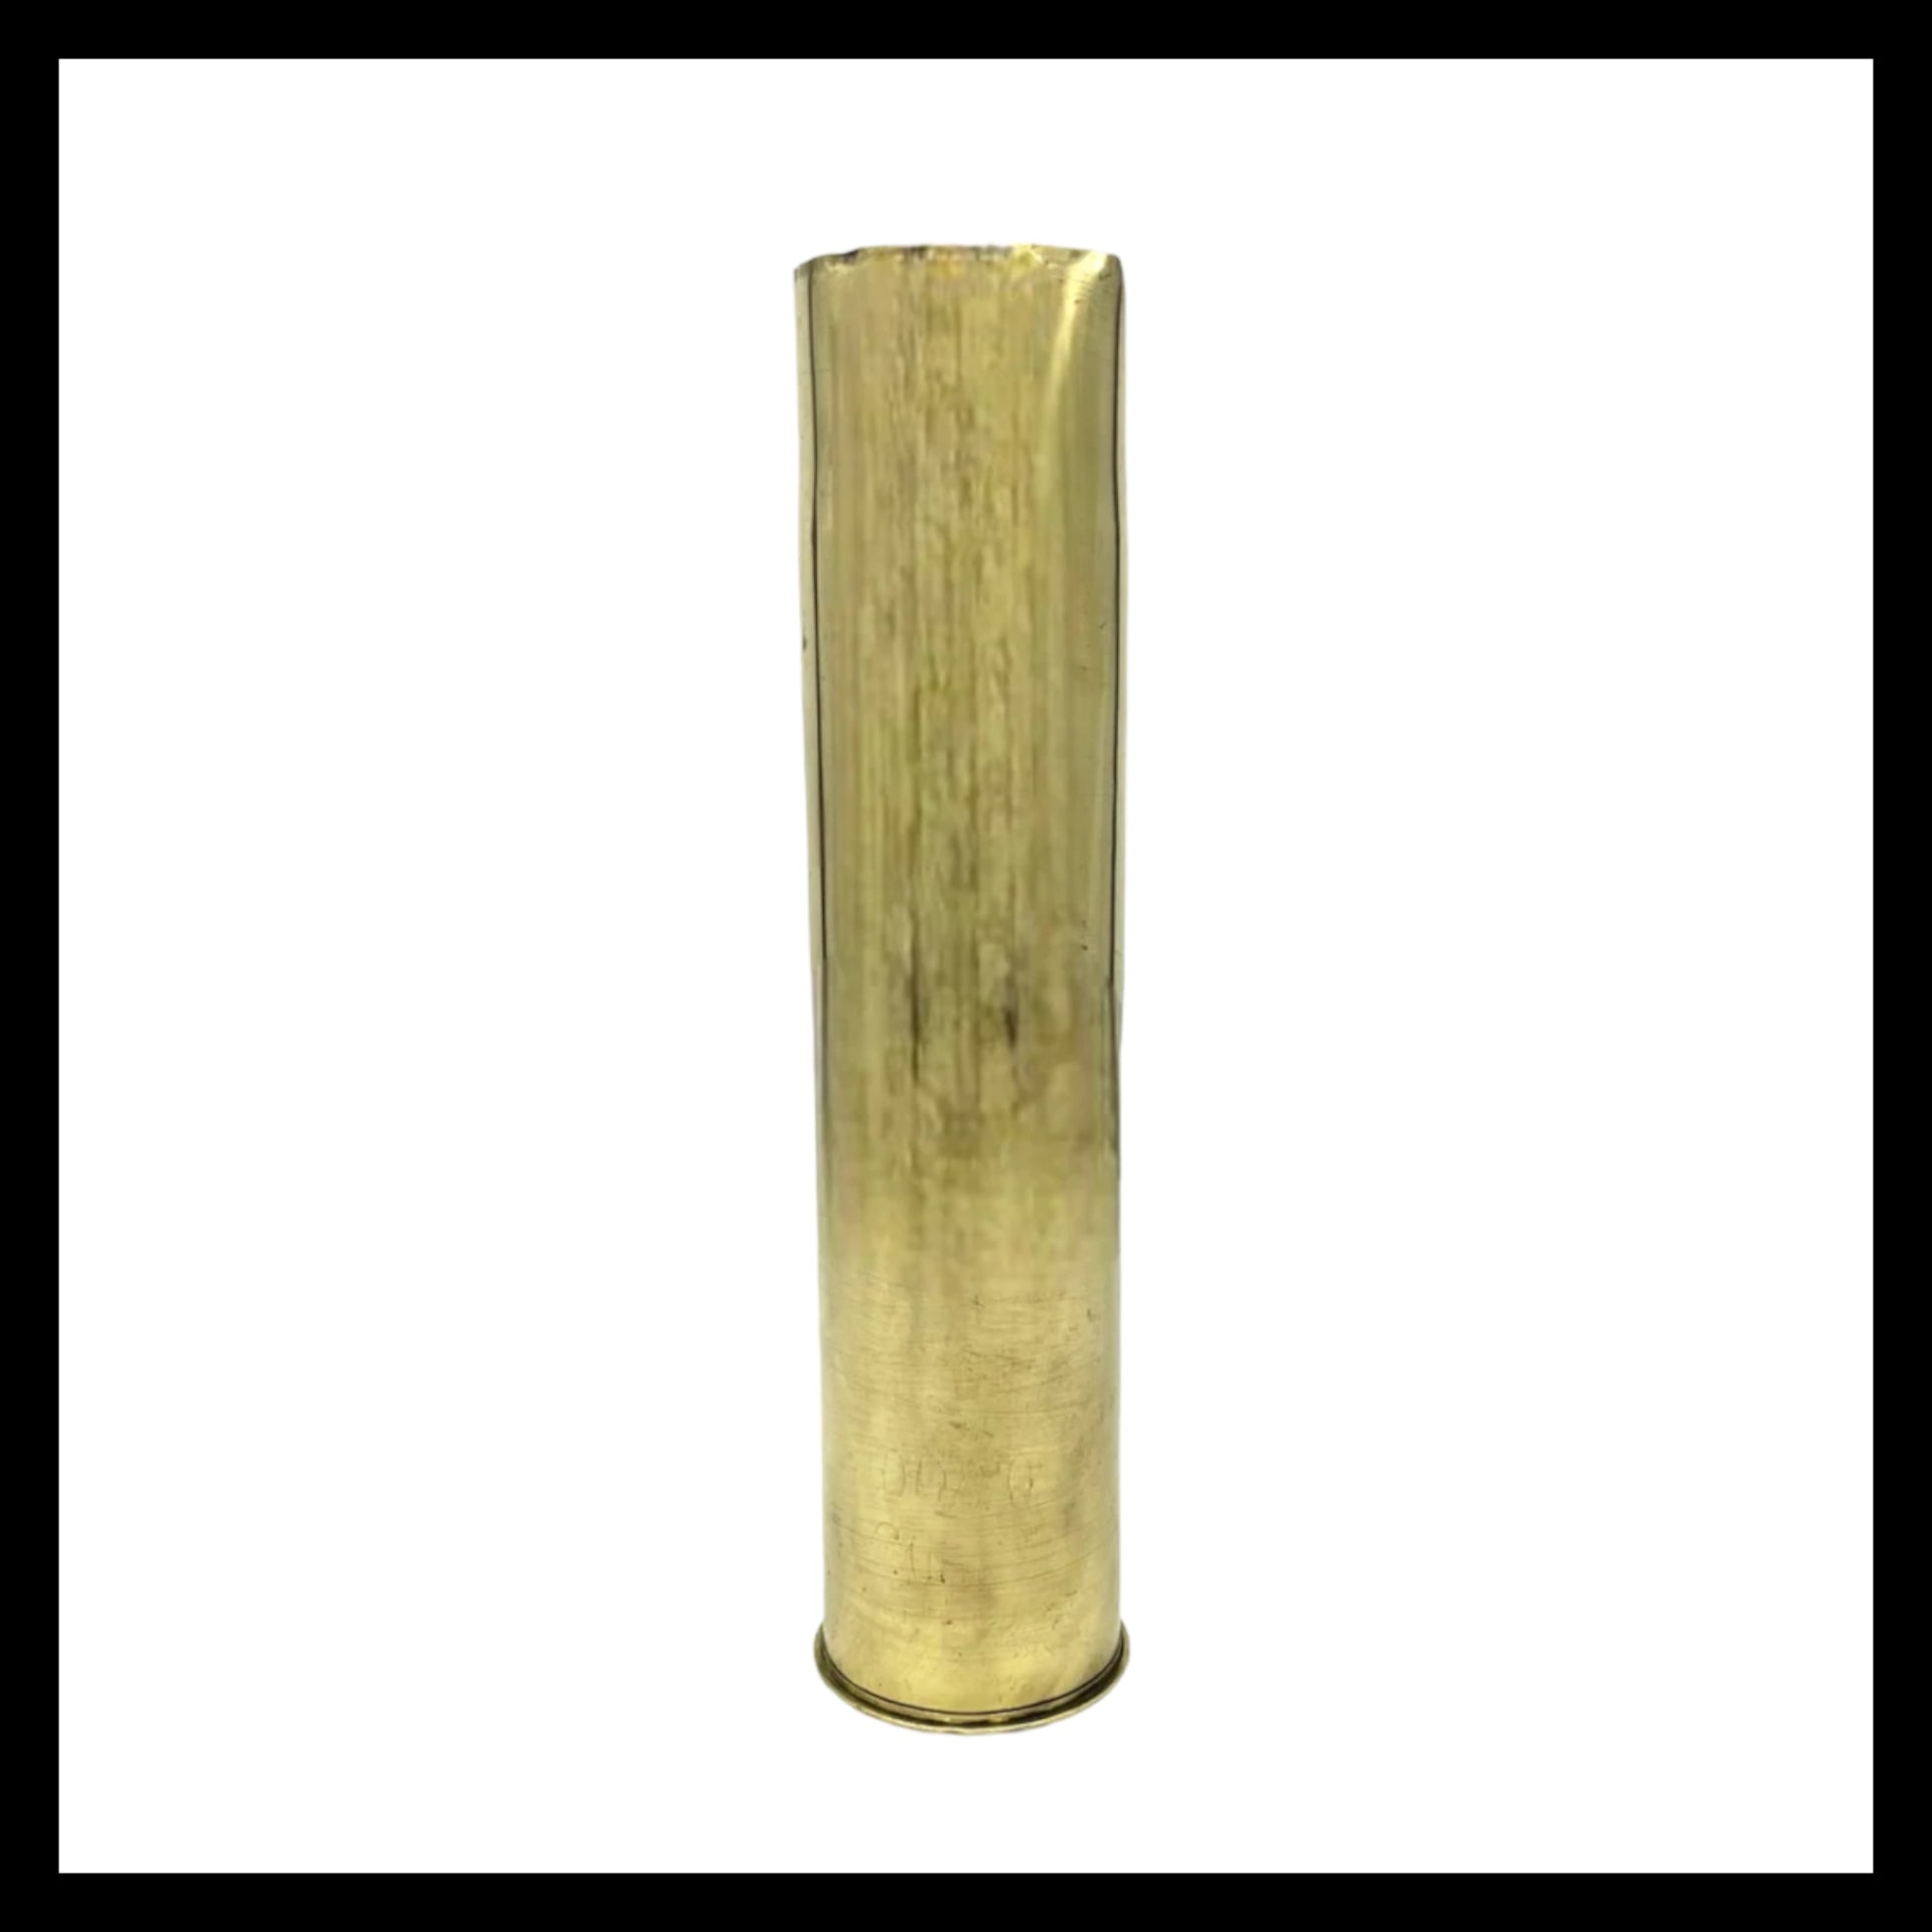 French WW1 brass shell case sold by All Things French Store